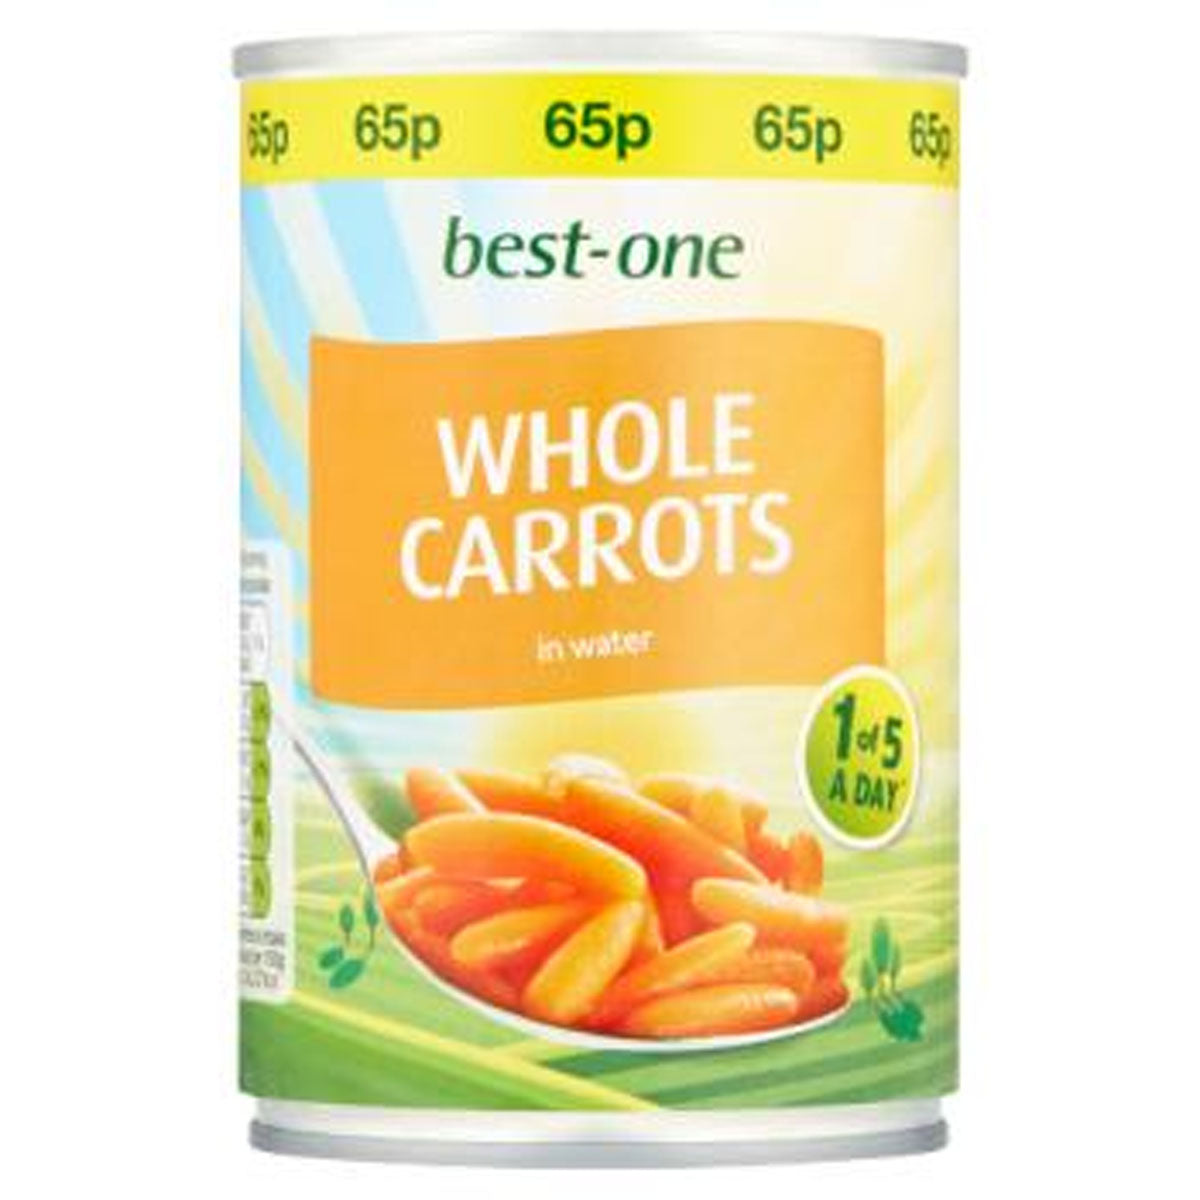 Best One - Whole Carrots in Water - 300g is the best product.